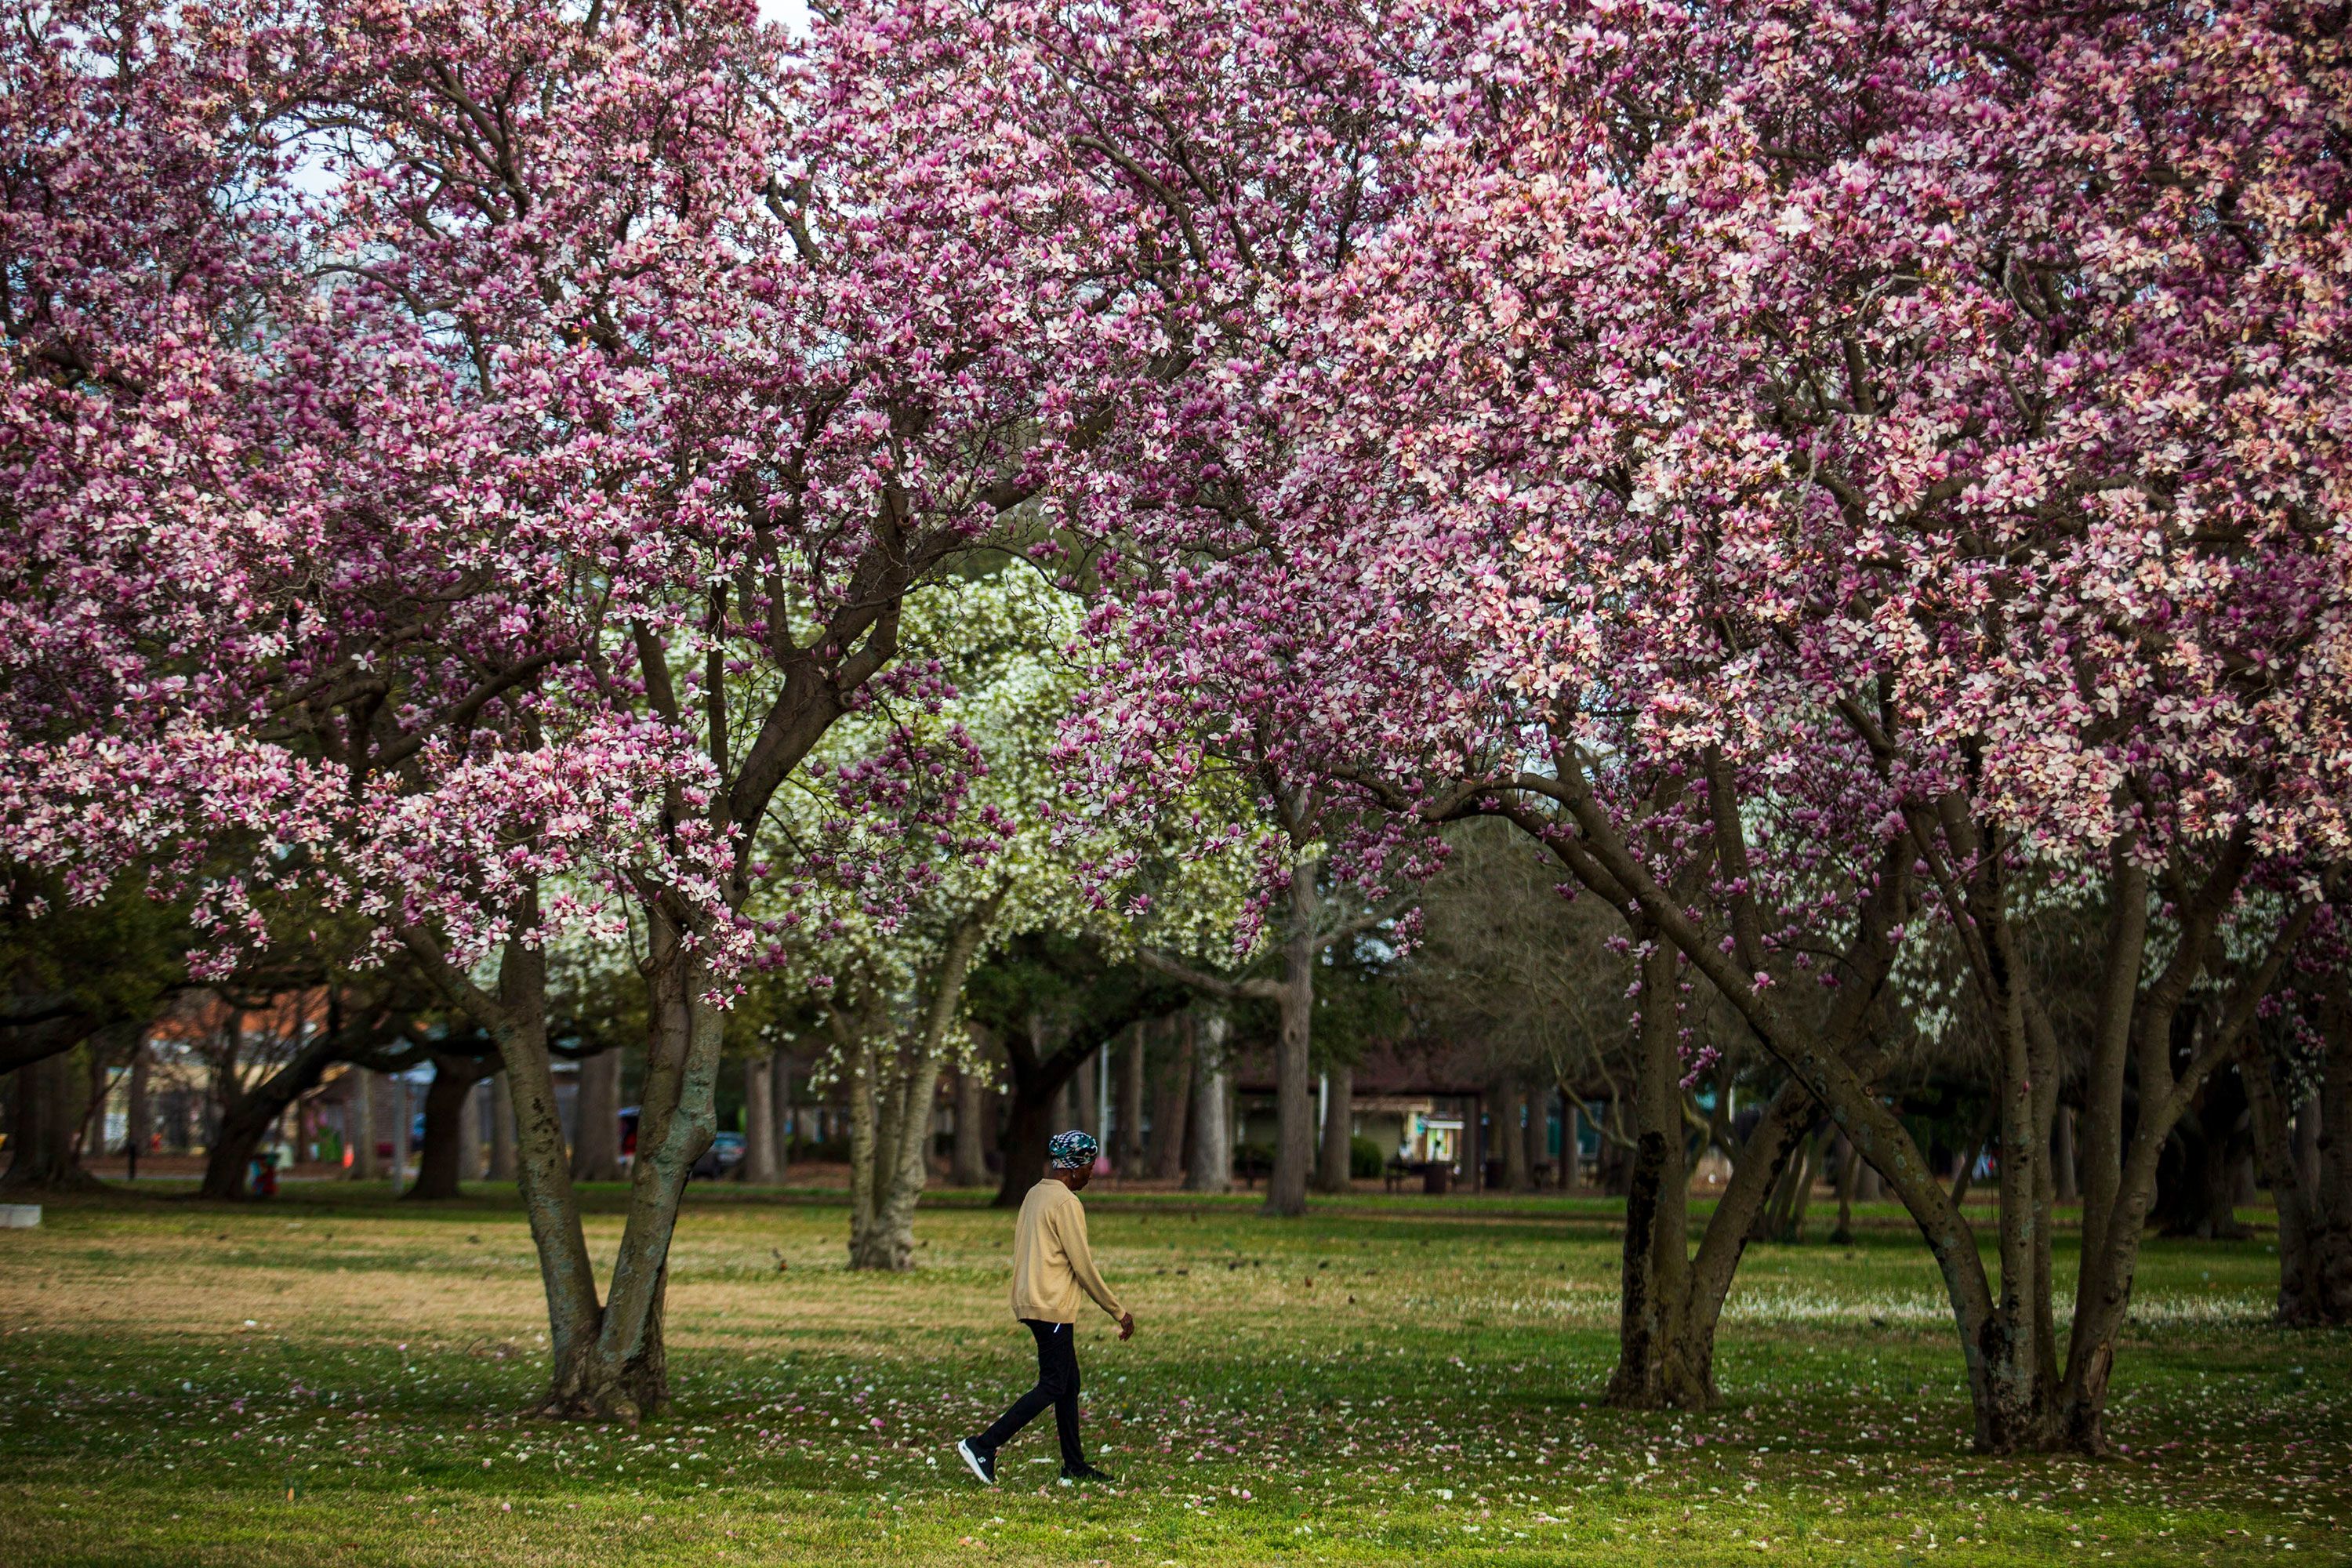 It's never been this warm in February. Here's why that's not a good thing